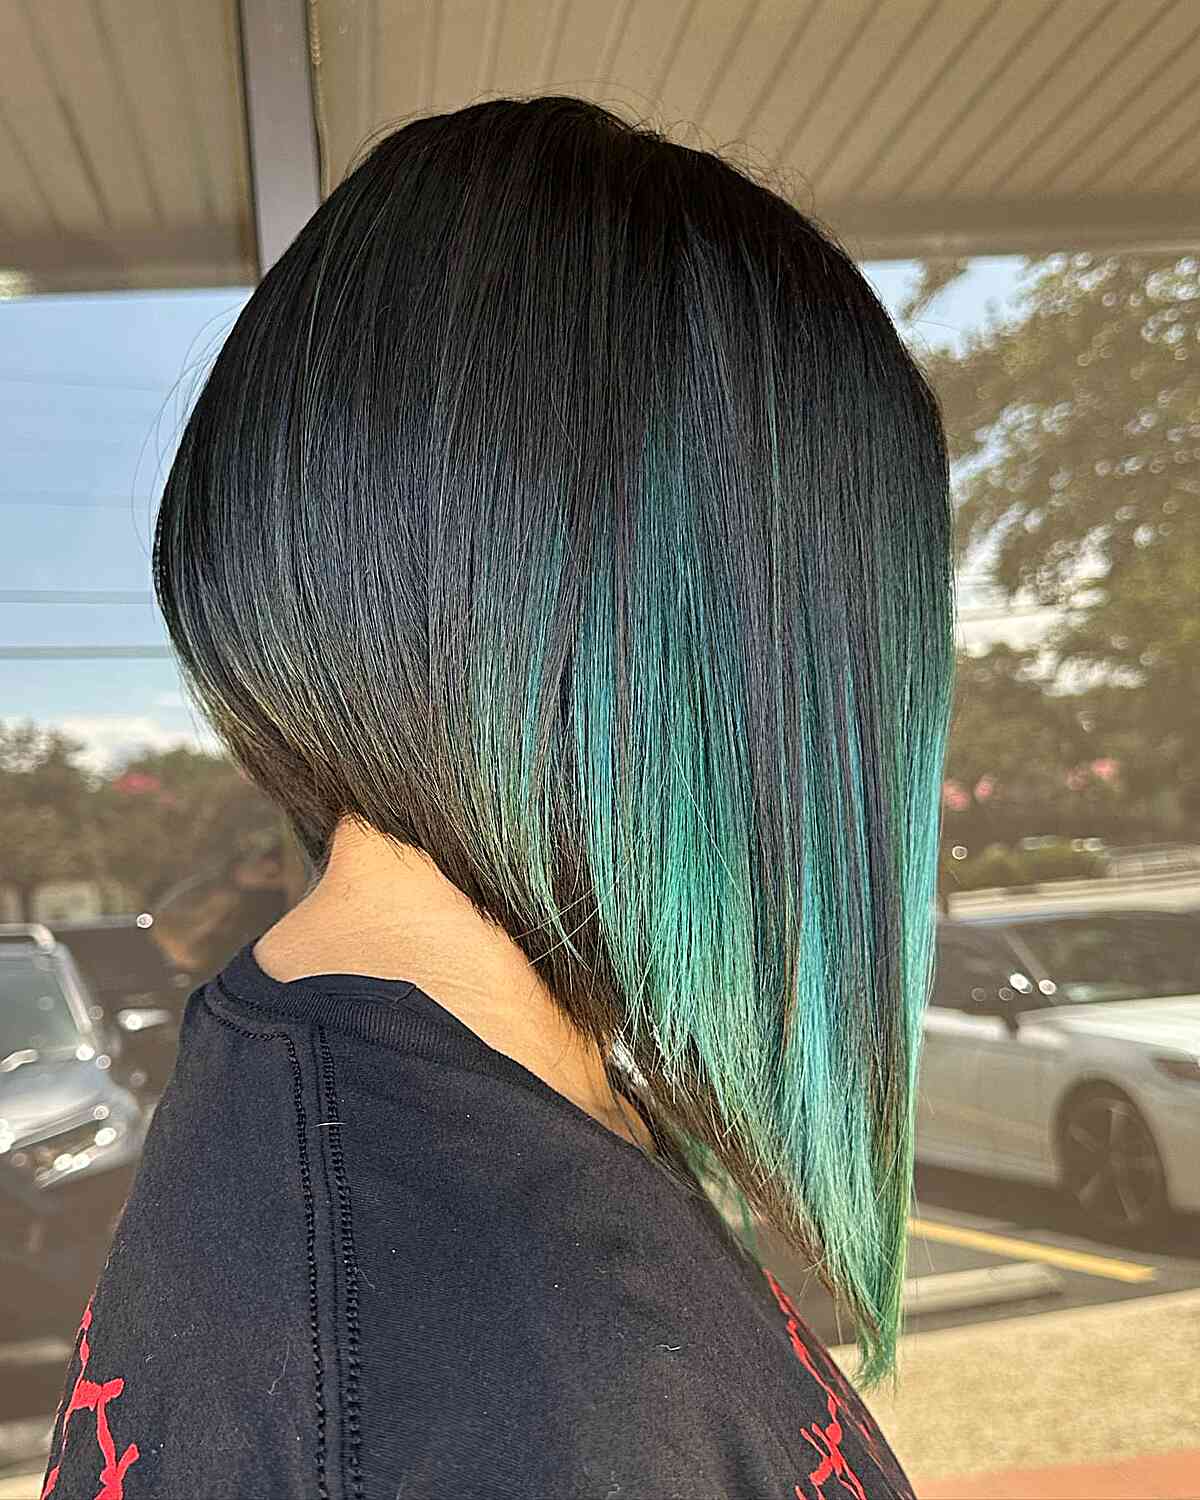 Stunning Black A-Line with Teal Highlights